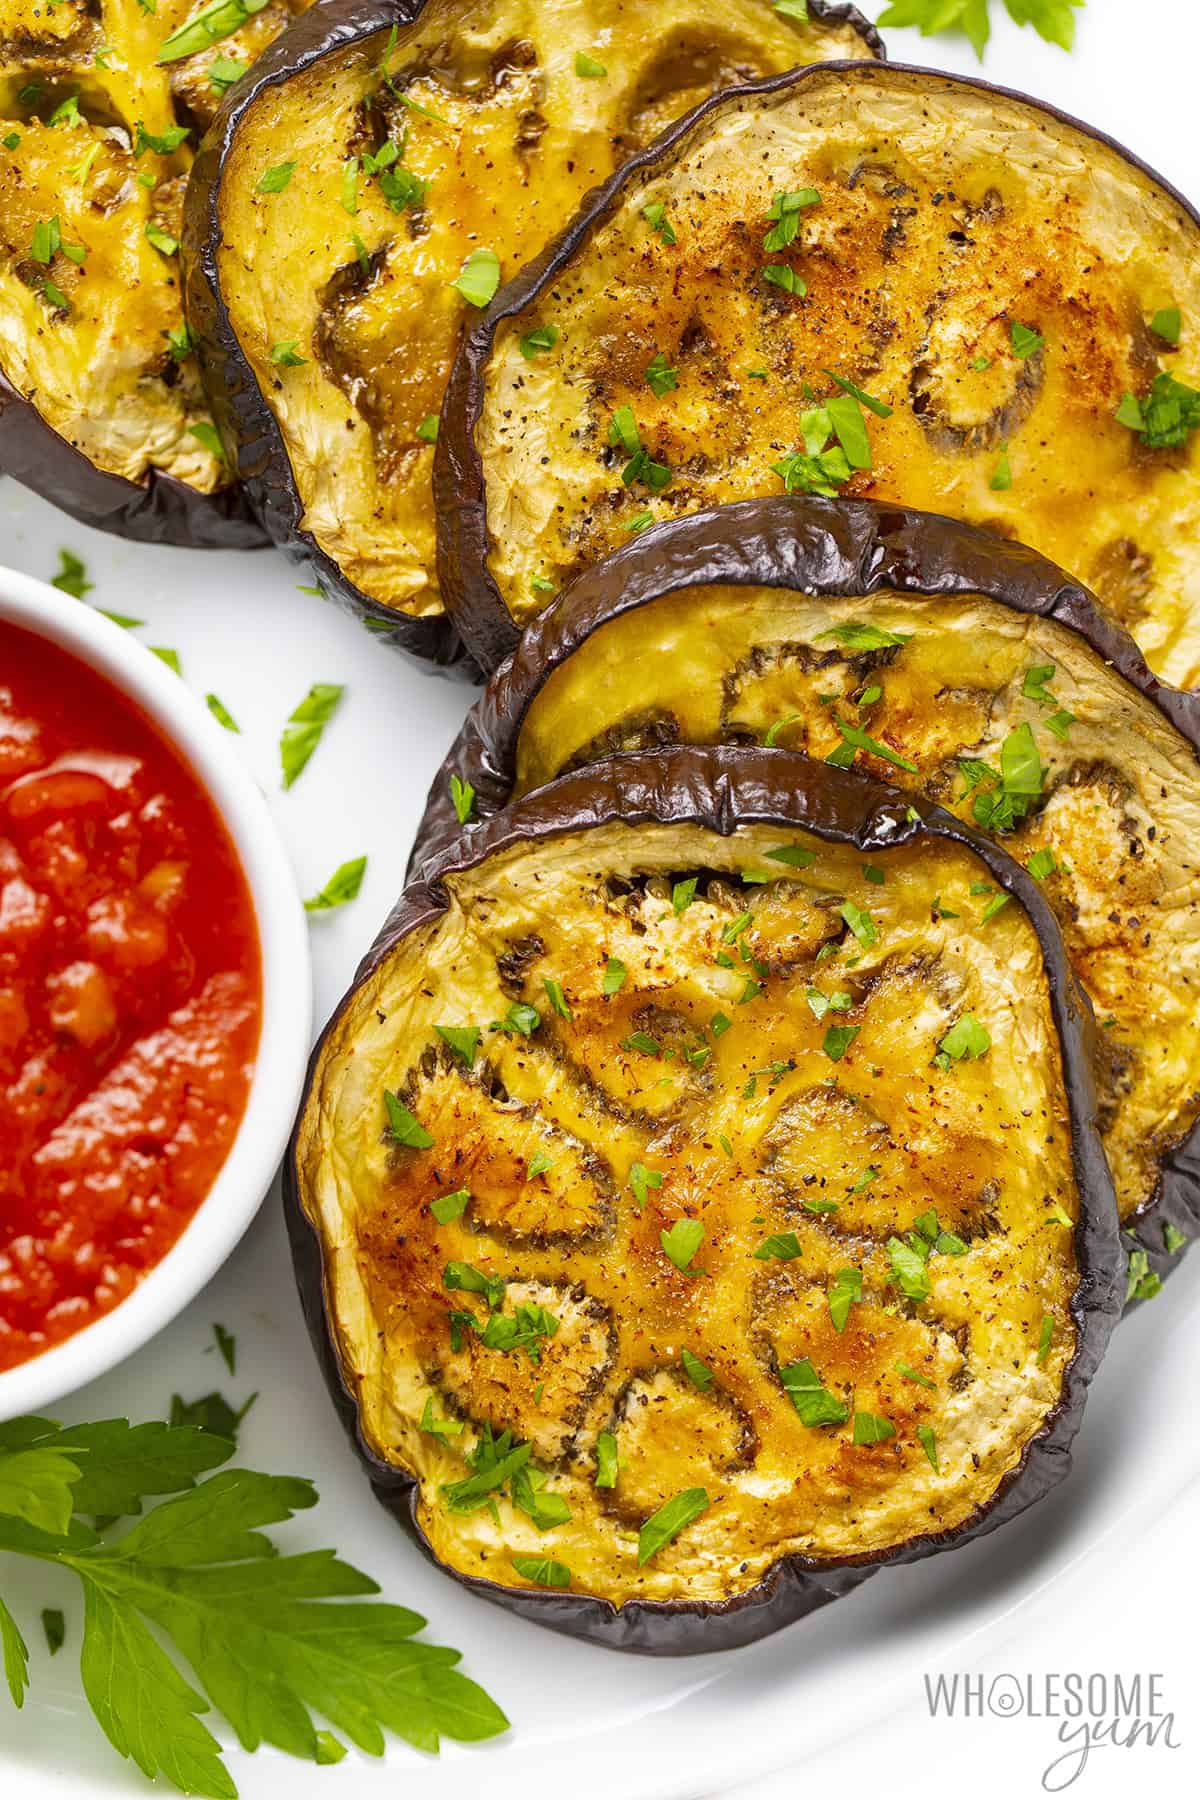 Learn how to cook eggplant like this with this recipe.